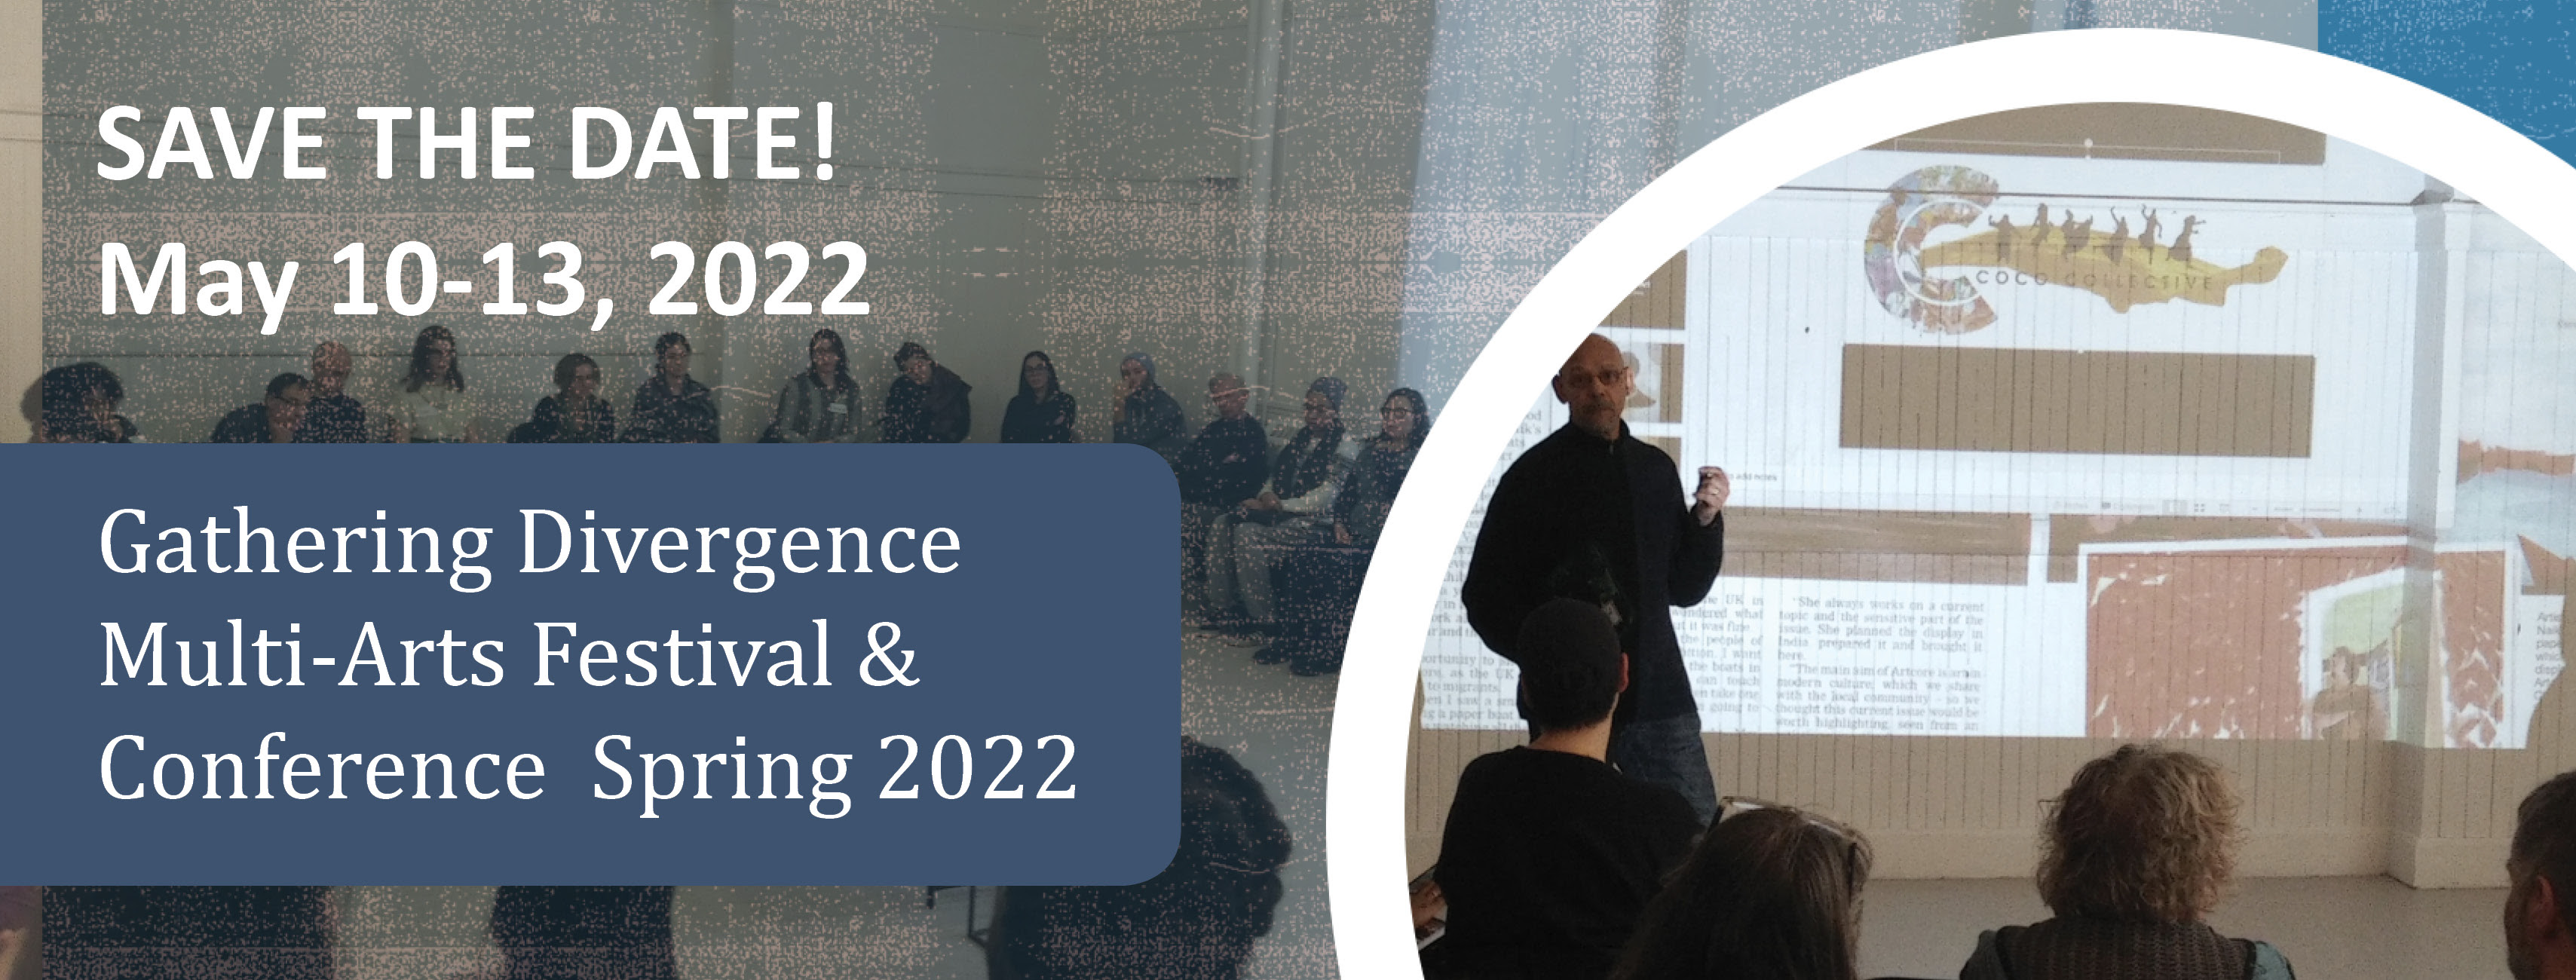 SAVE THE DATE! May 10-13, 2022. Gathering Divergence Multi-Arts Festival & Conference Spring 2022. Behind the text images of a workshop and a person speaking with images projected on the screen behind him.   